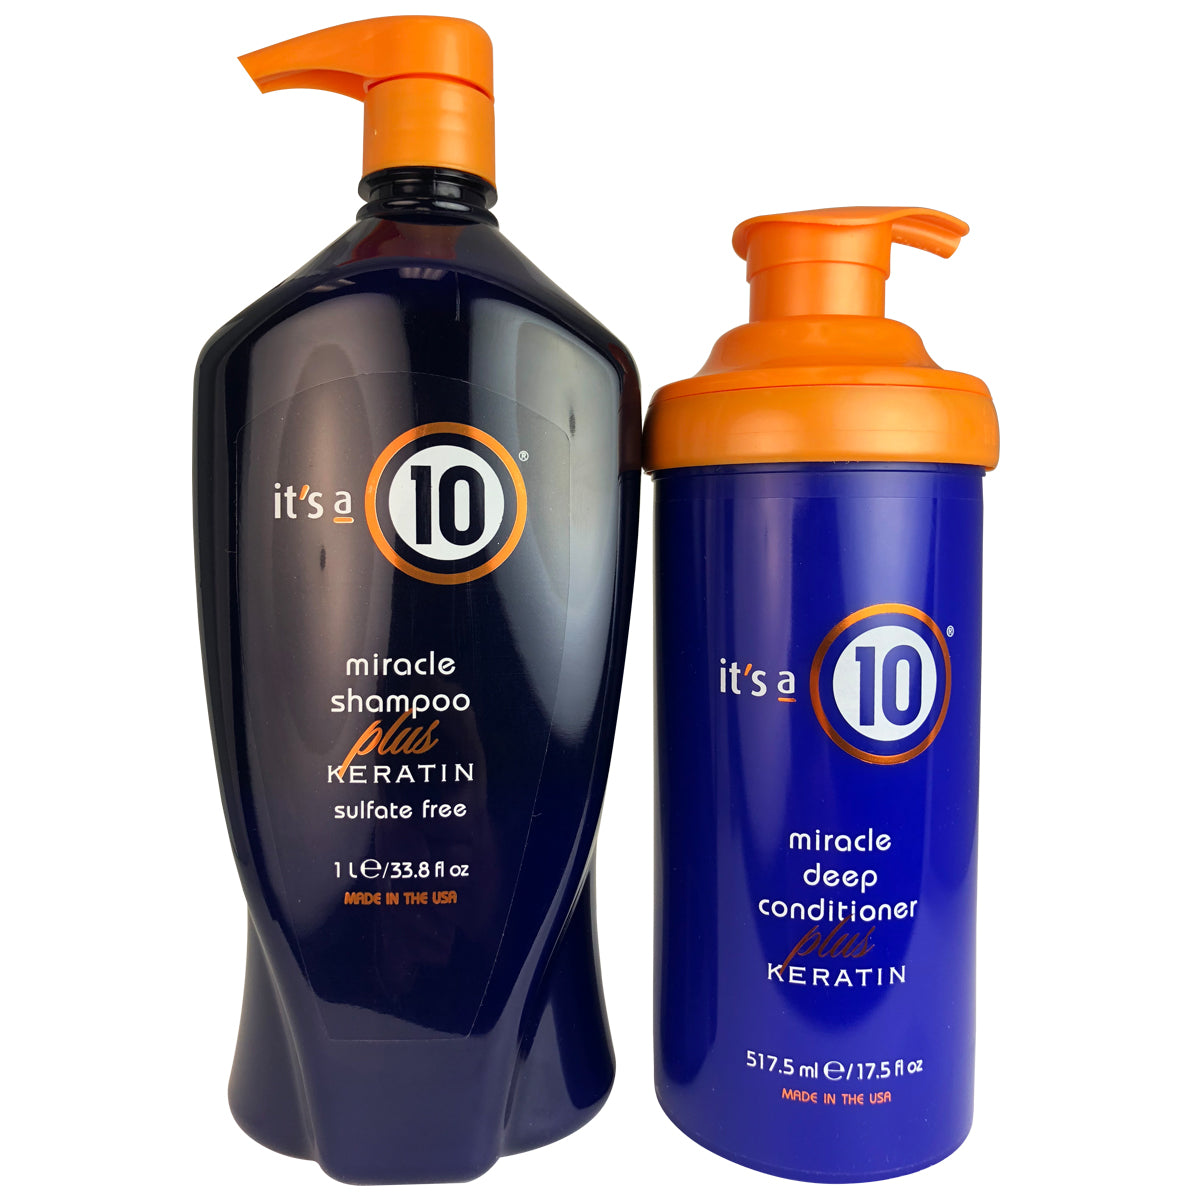 It's a 10 Miracle Shampoo & Deep Conditioner Plus Keratin Duo 33.3 oz - 17.5 oz